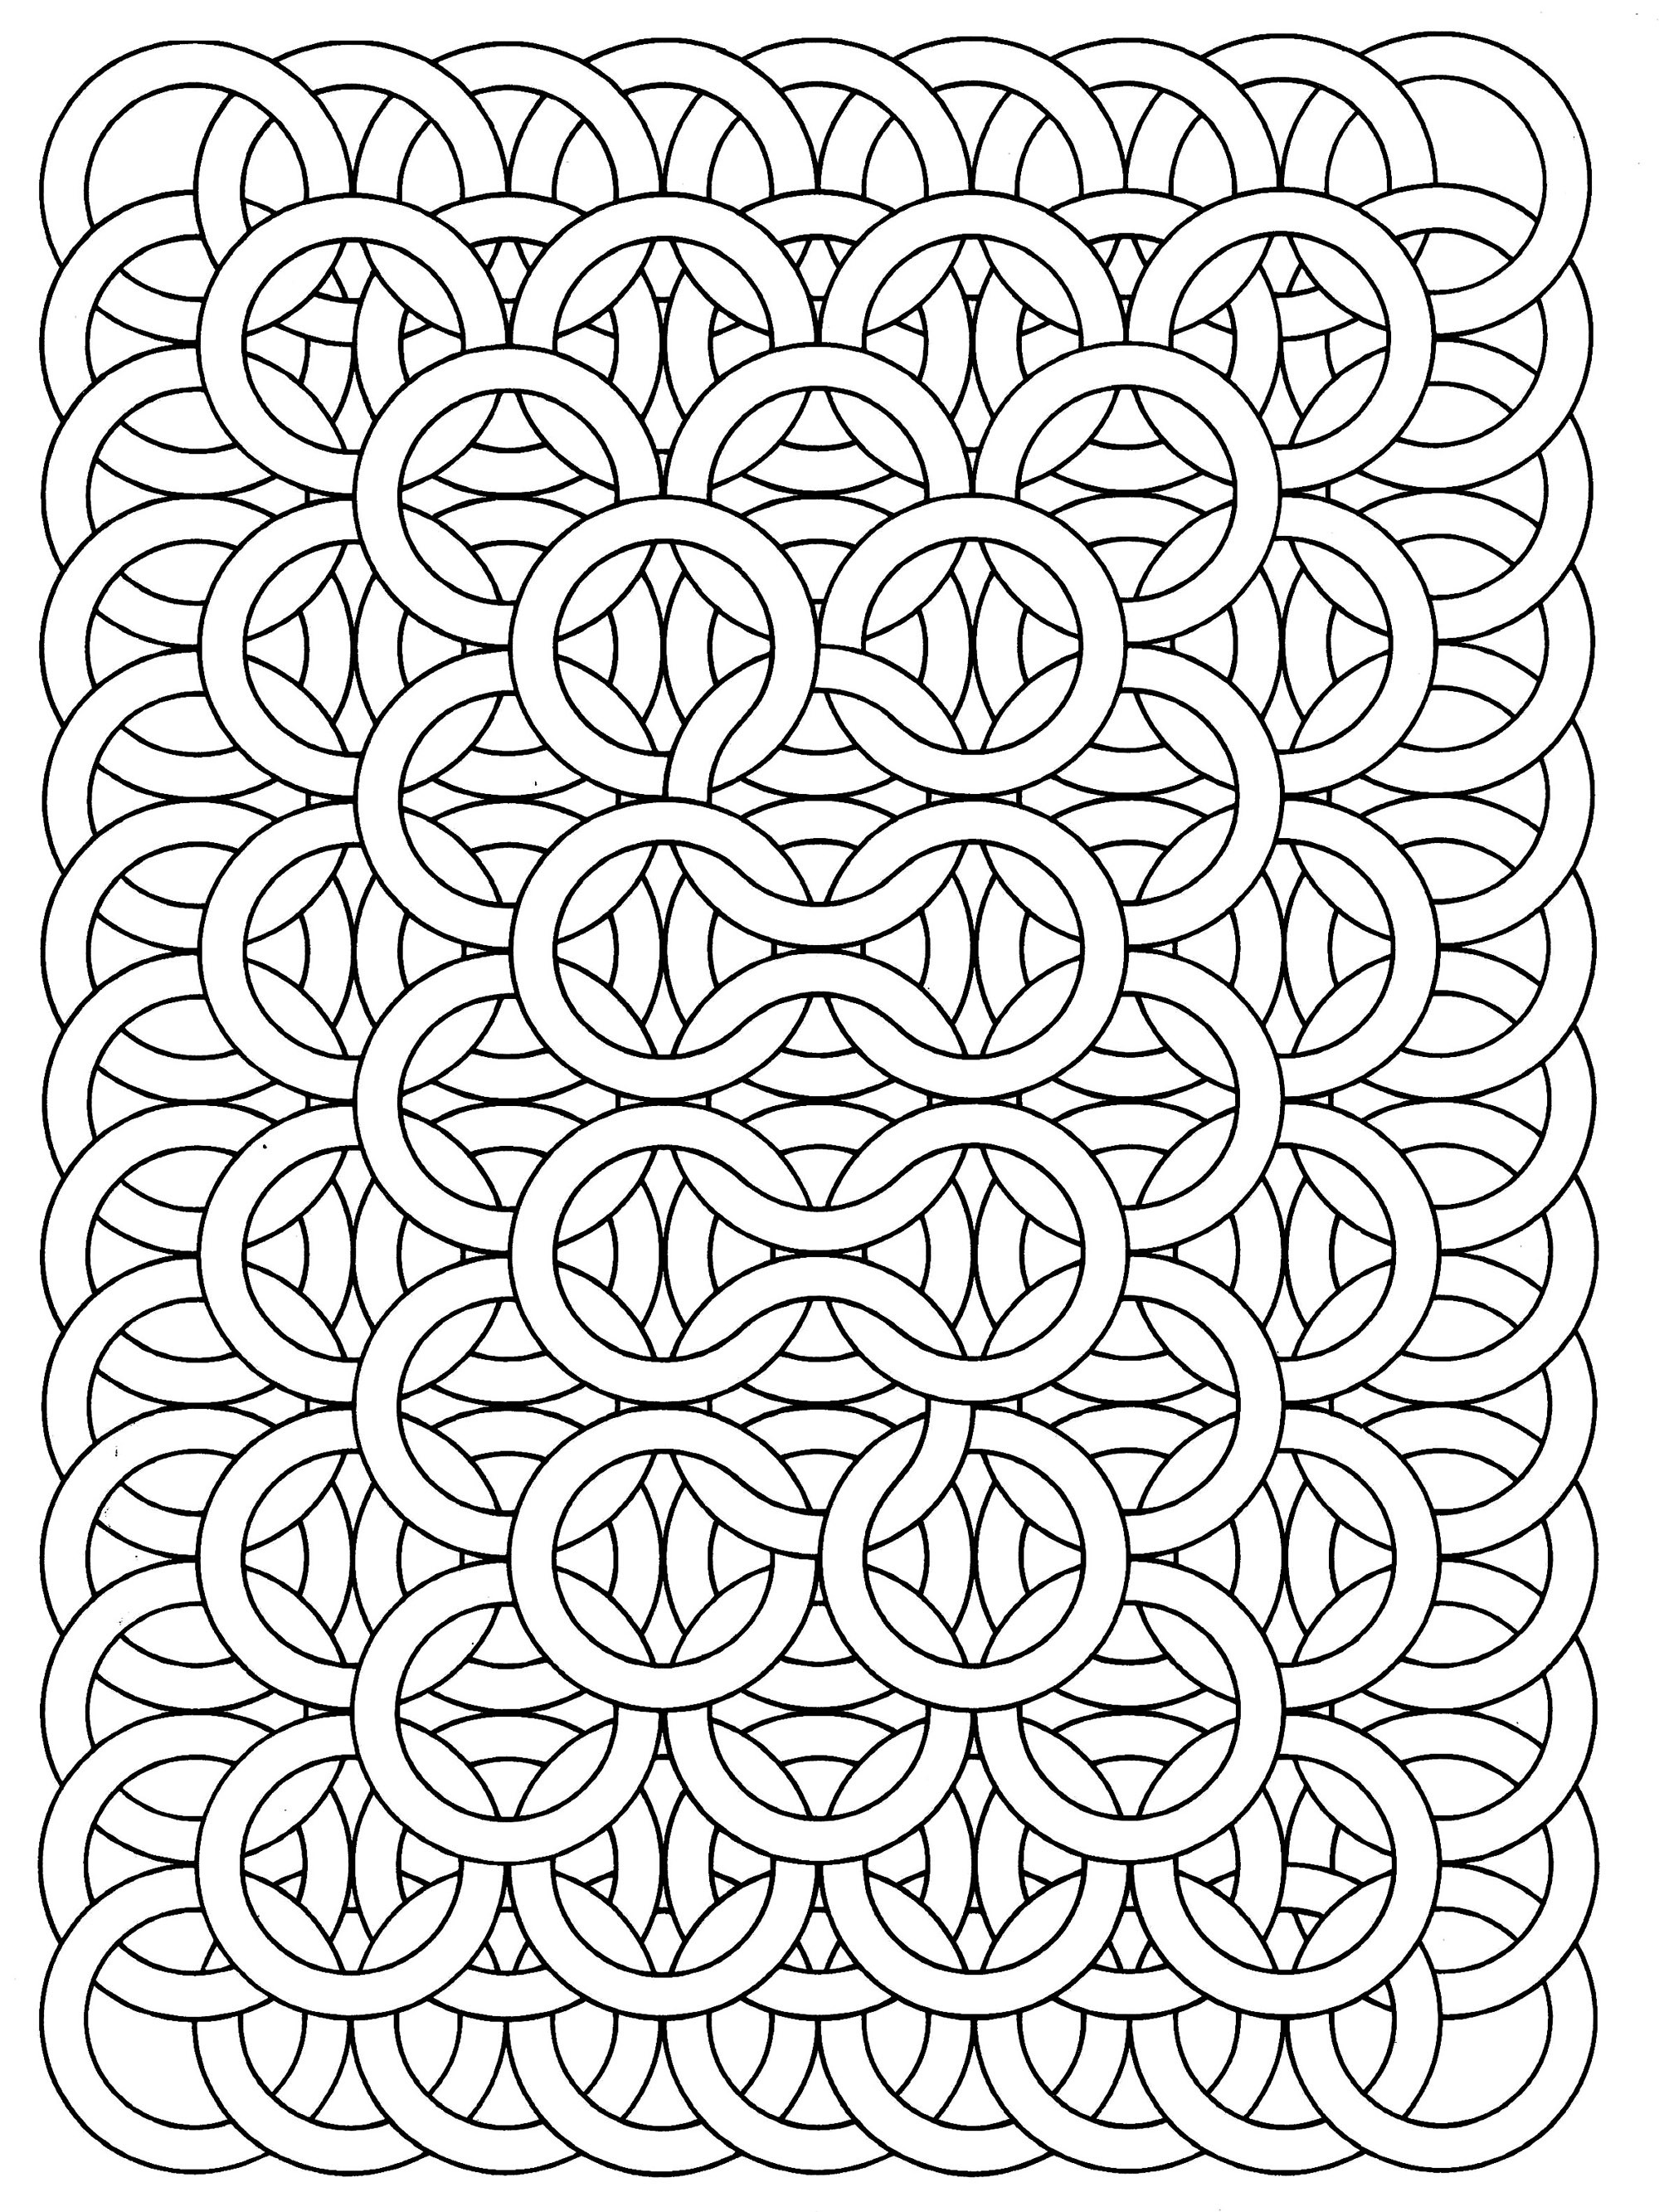 Printable Adult Coloring Pages Free
 FREE Adult Coloring Pages Happiness is Homemade